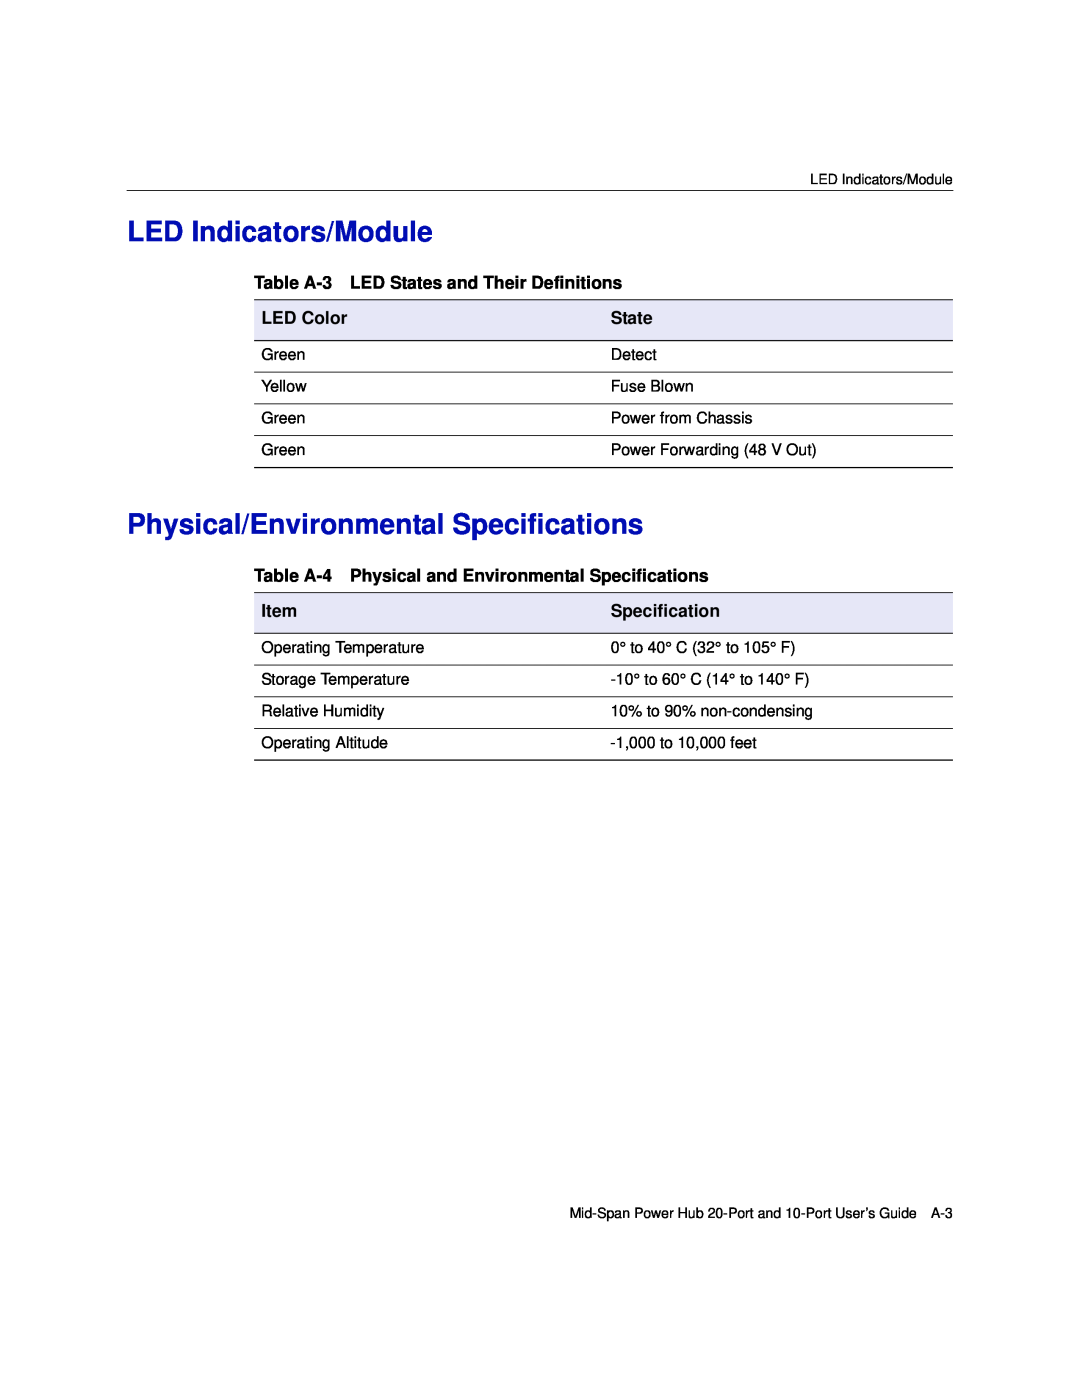 Enterasys Networks BL-89720ENT, BL-89520ENT LED Indicators/Module, Physical/Environmental Specifications, LED Color, State 